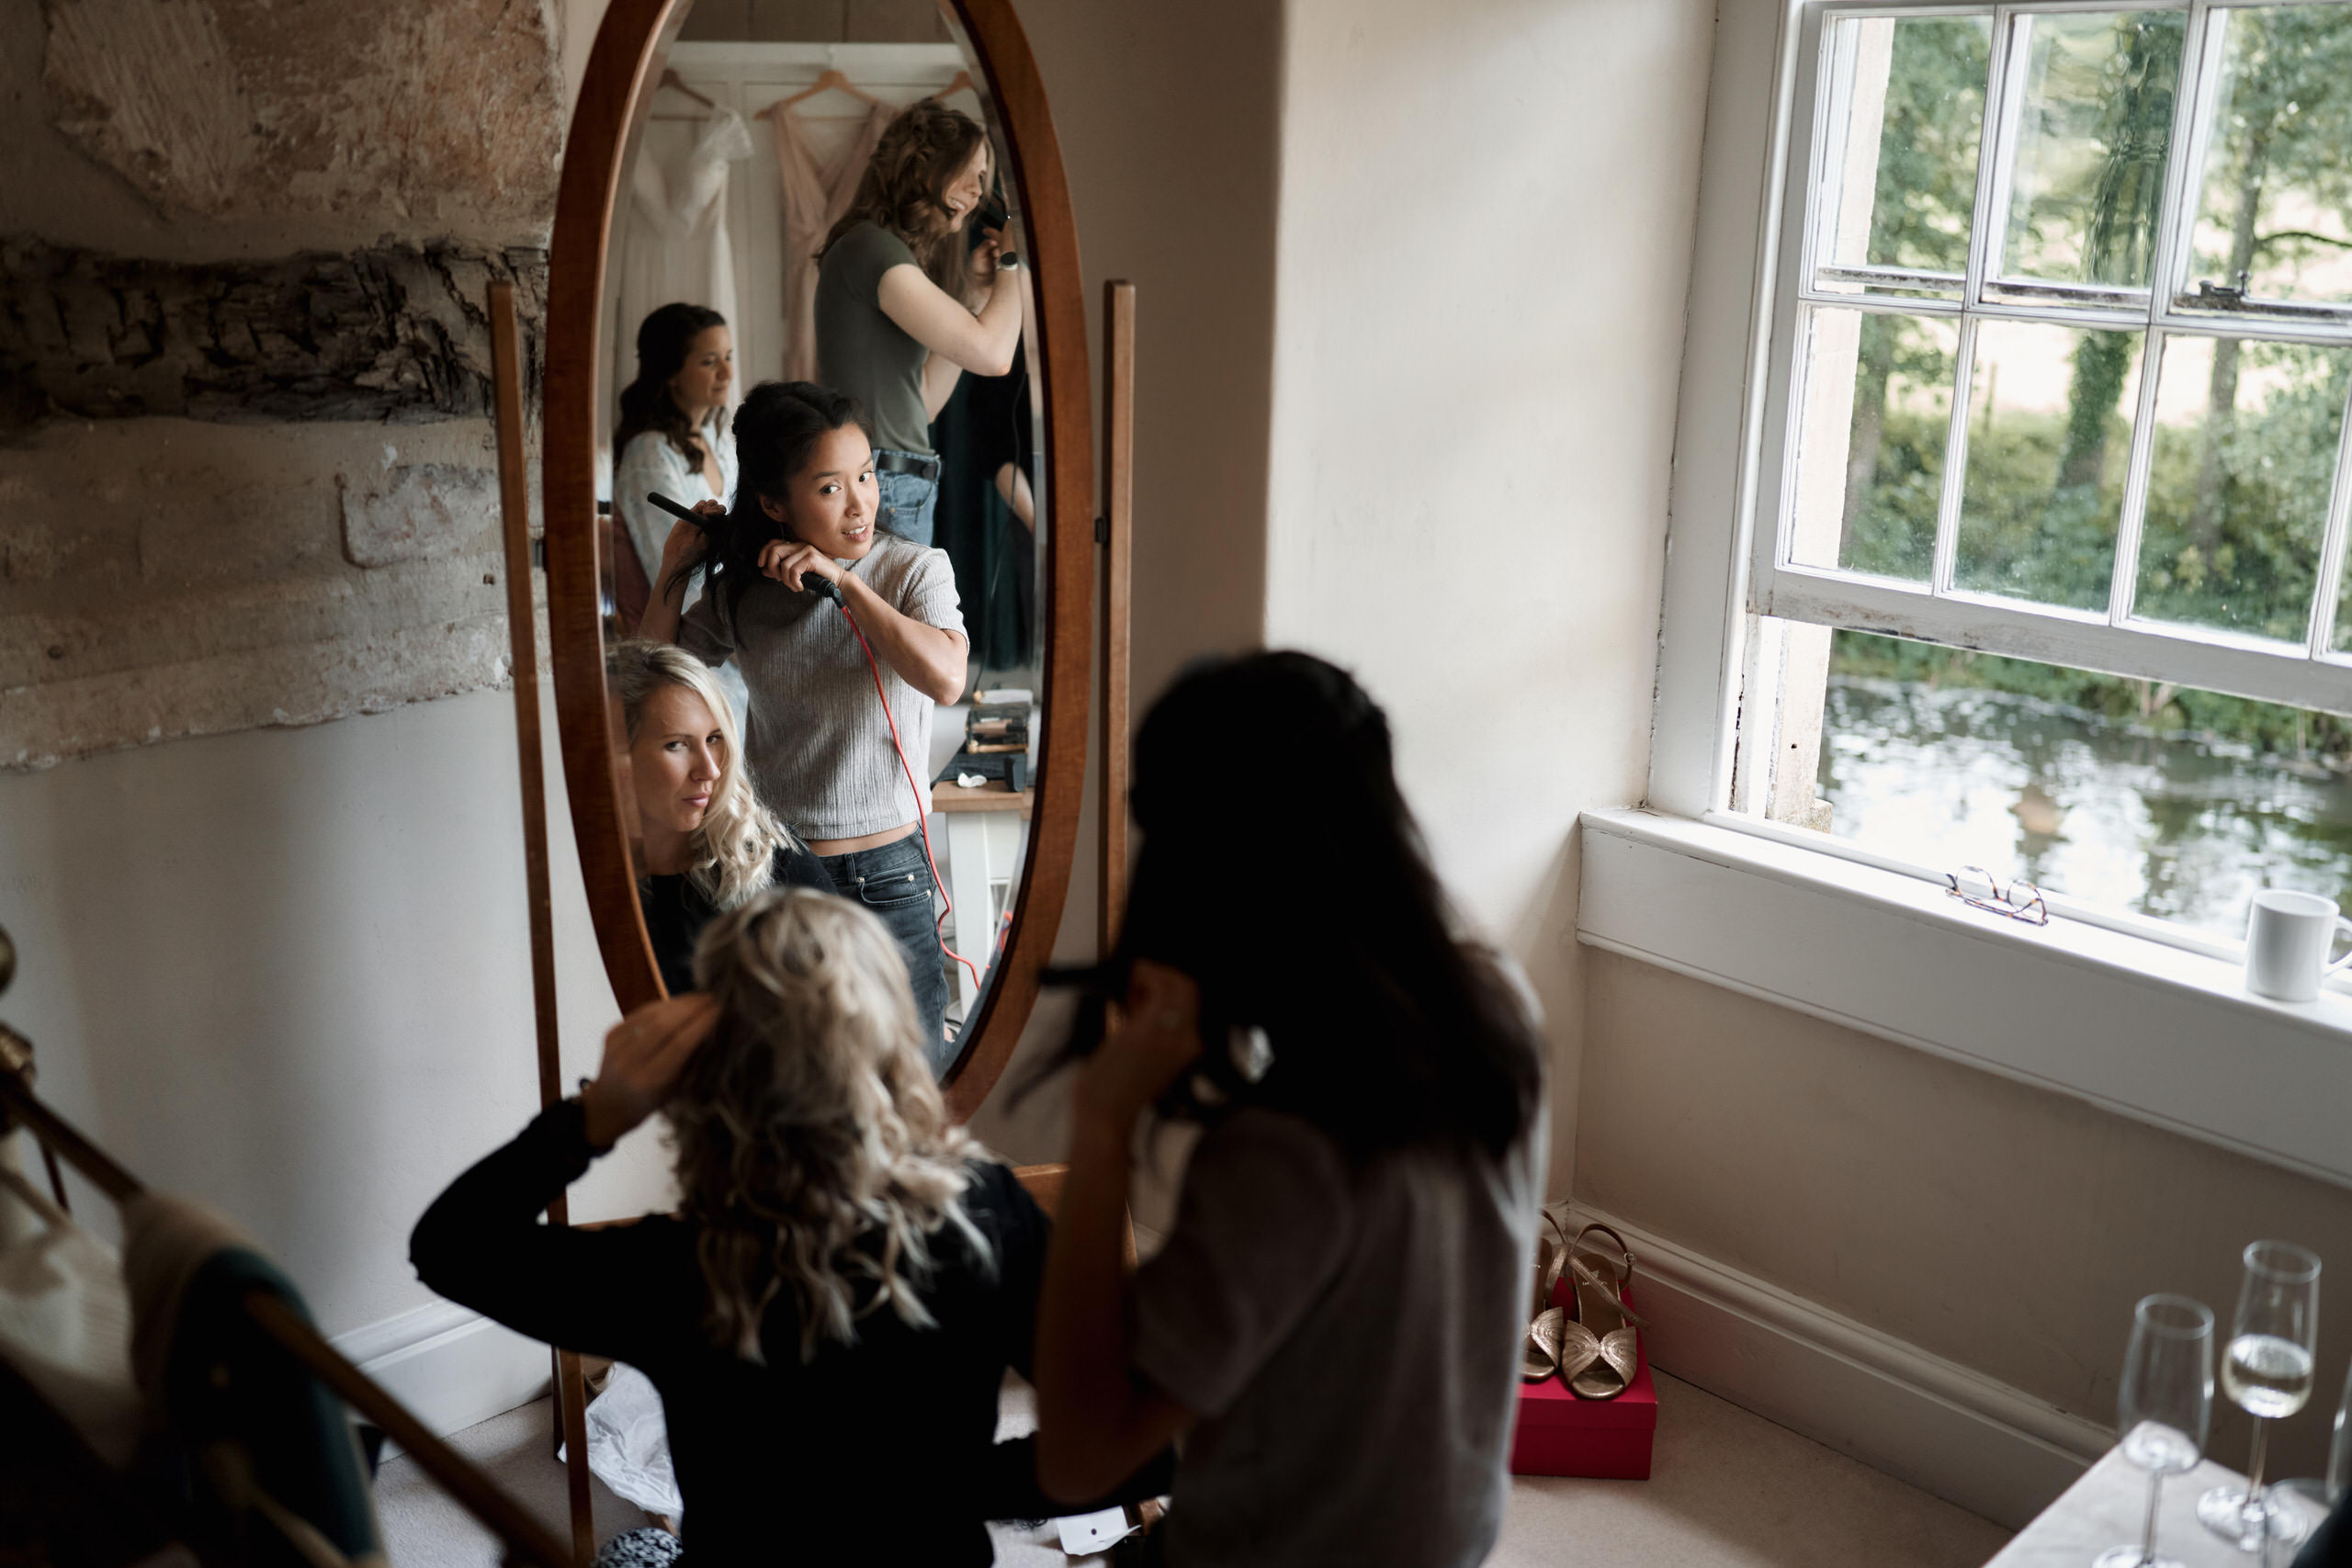 A woman is having her hair styled before her wedding, while looking at herself in the mirror.